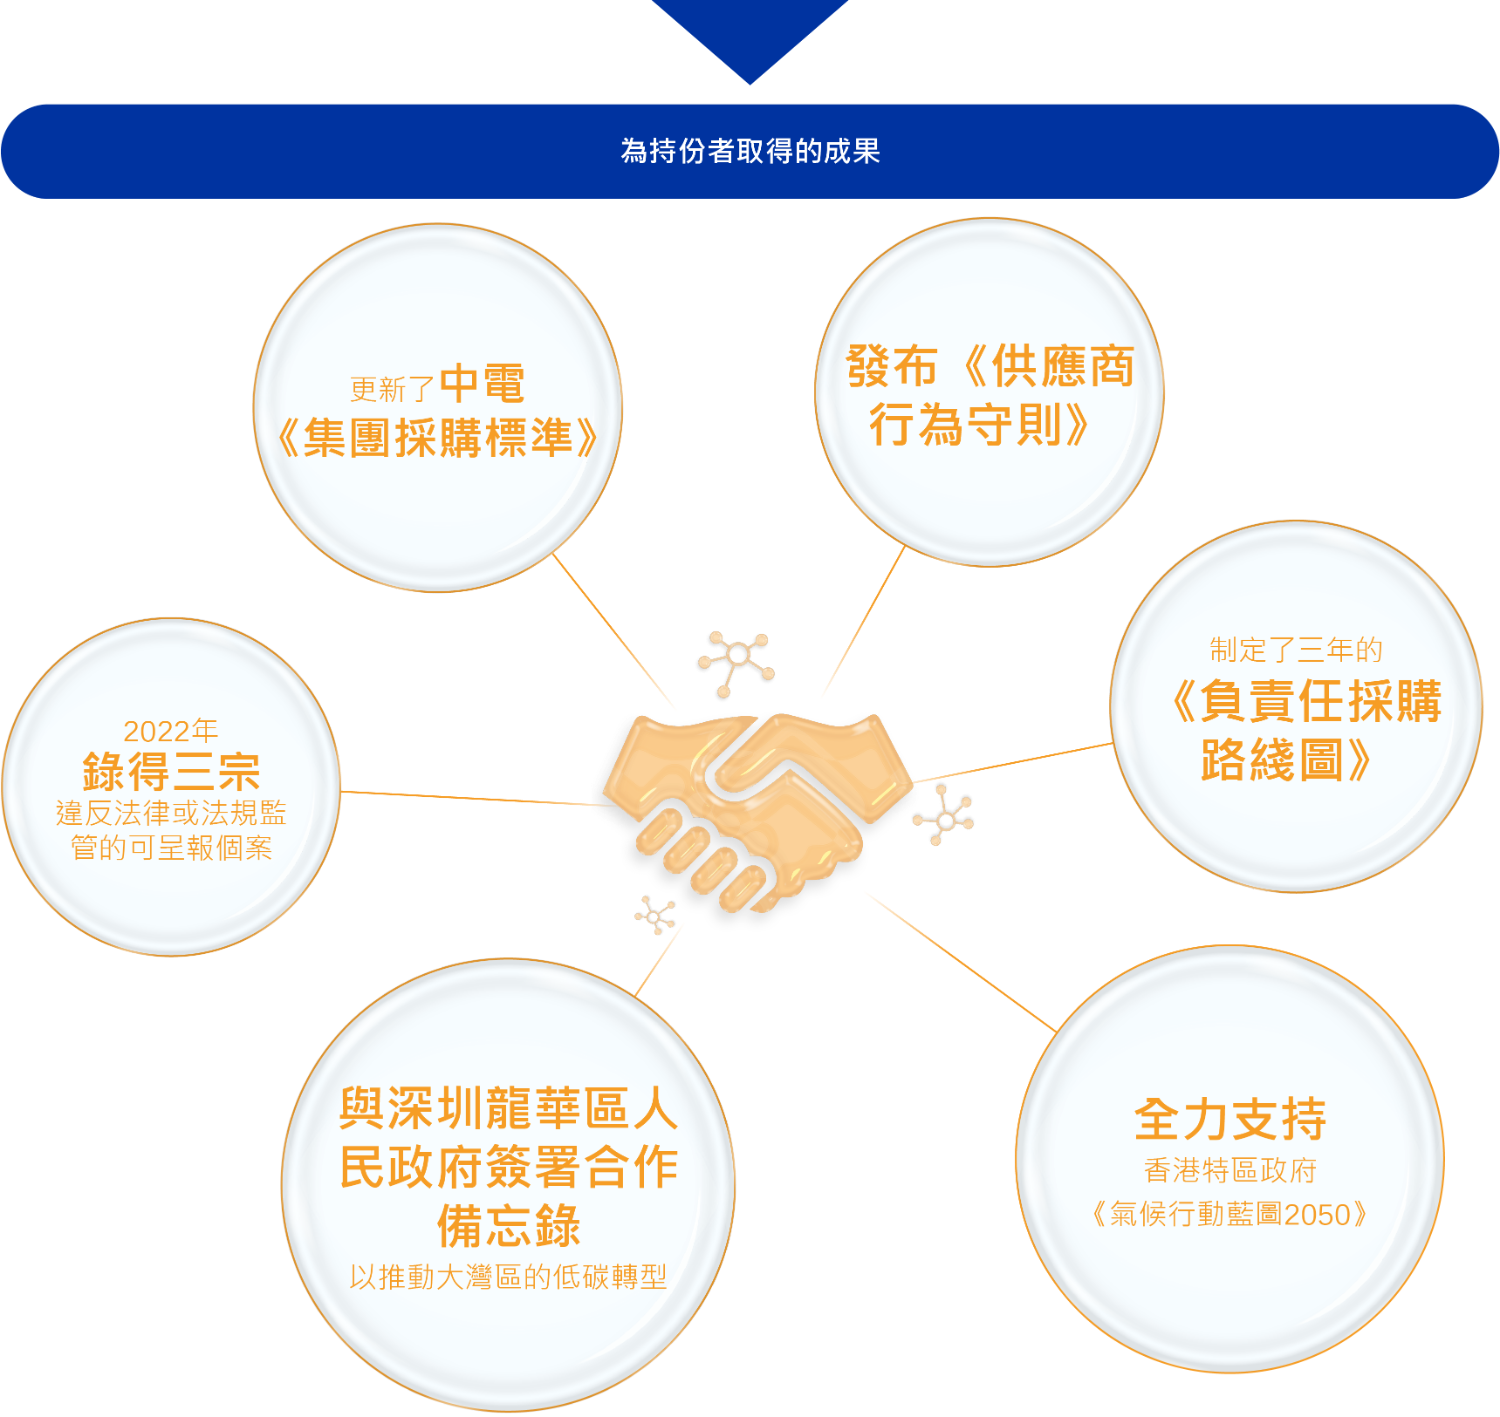 Chapter_overview_Partner(Chinese)